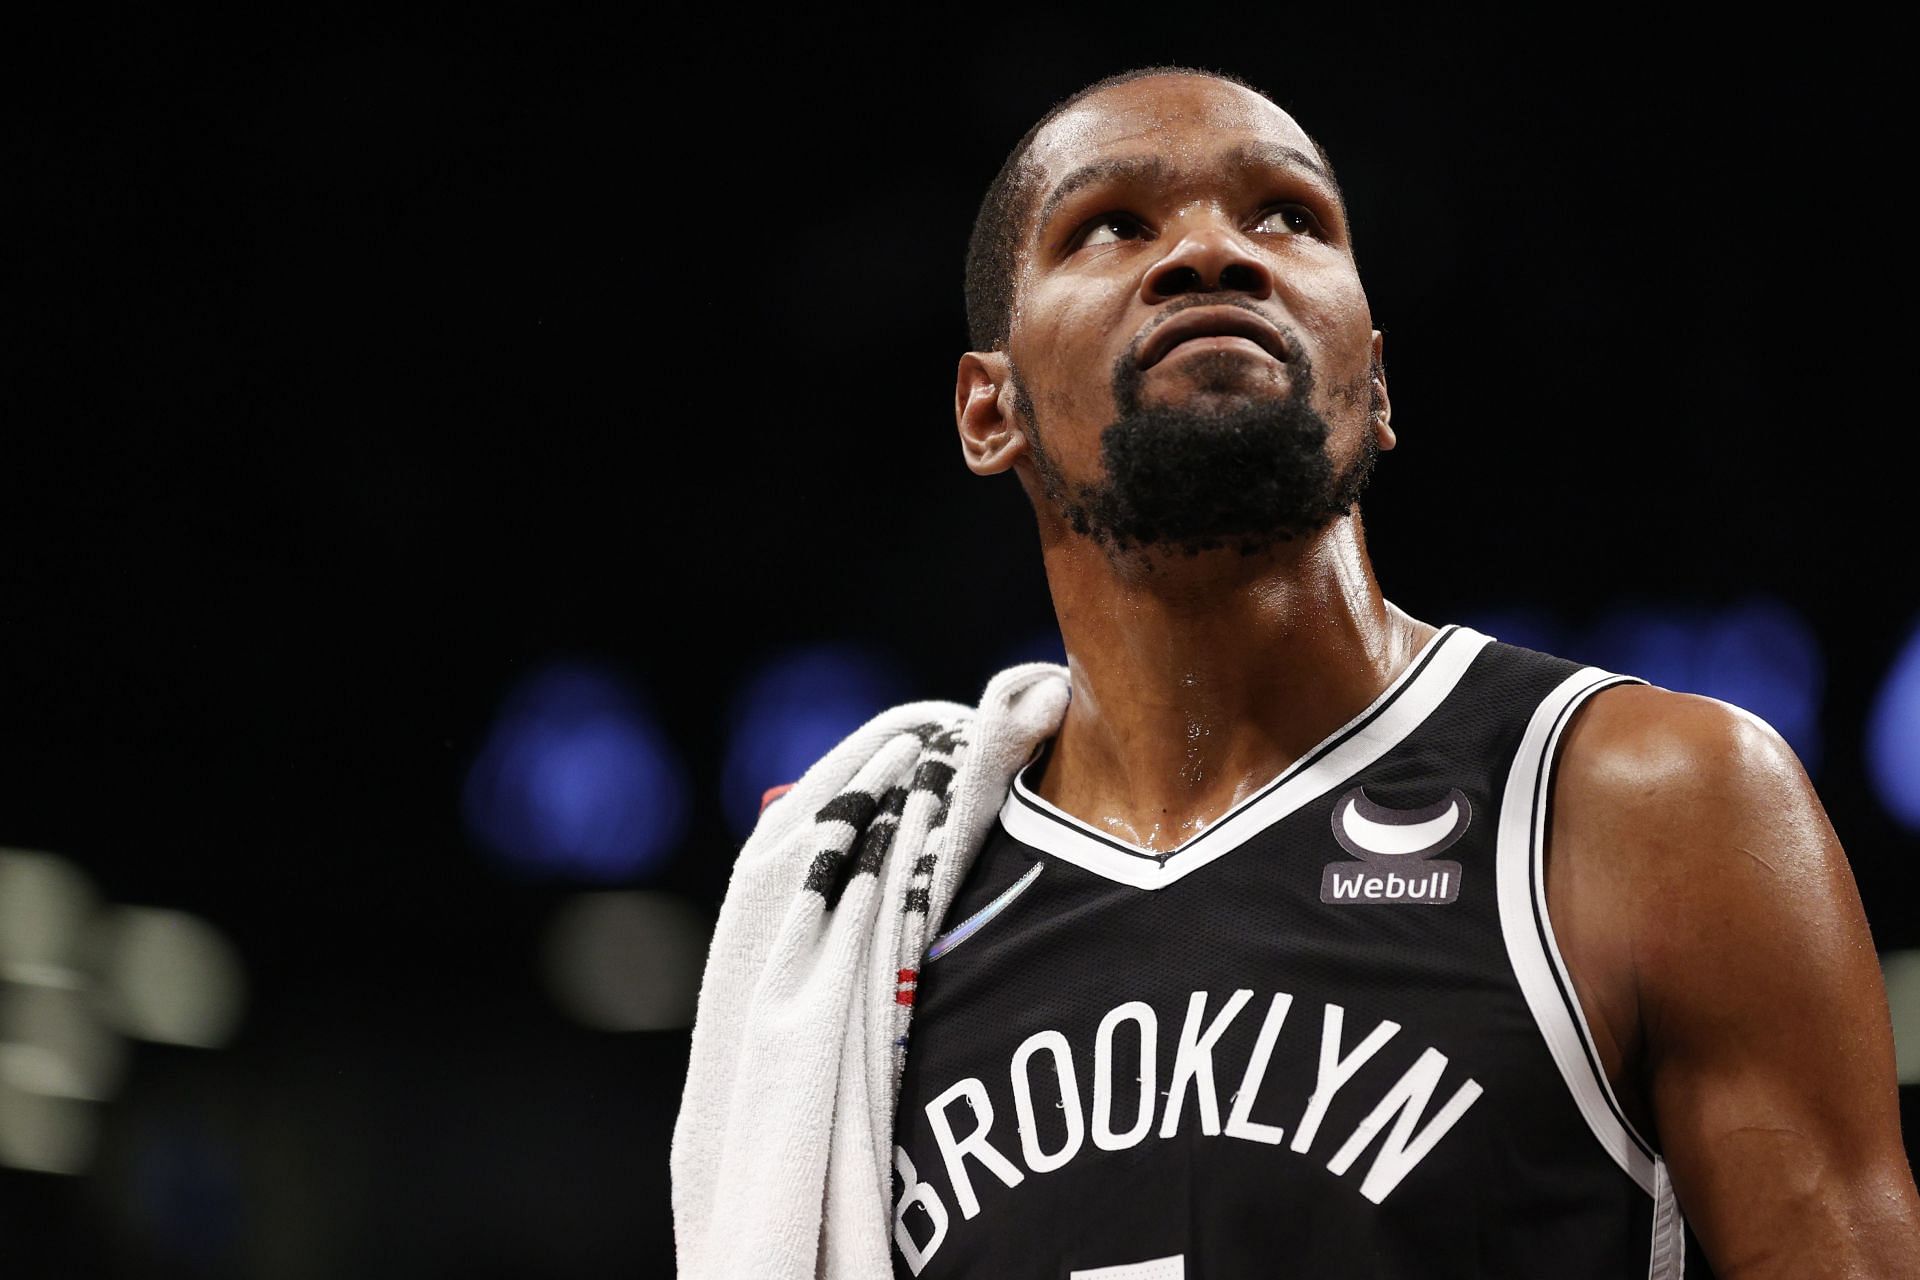 Kevin Durant of the Brooklyn Nets looks on during the first half of the Eastern Conference play-in tournament game against the Cleveland Cavaliers on April 12 in the Brooklyn borough of New York City.